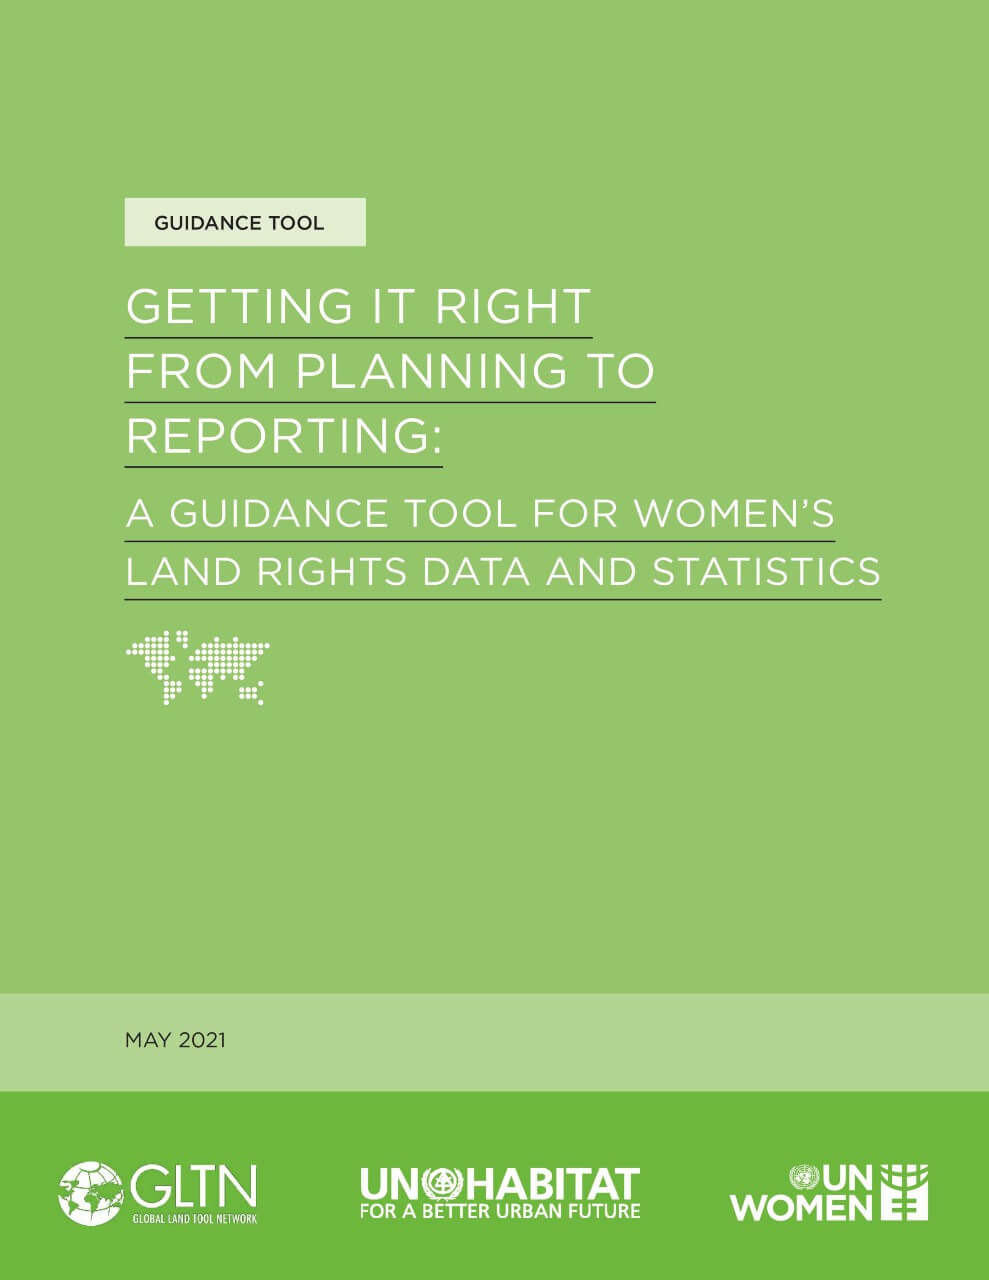 Getting it right from planning to reporting: A guidance tool for women's land rights data and statistics